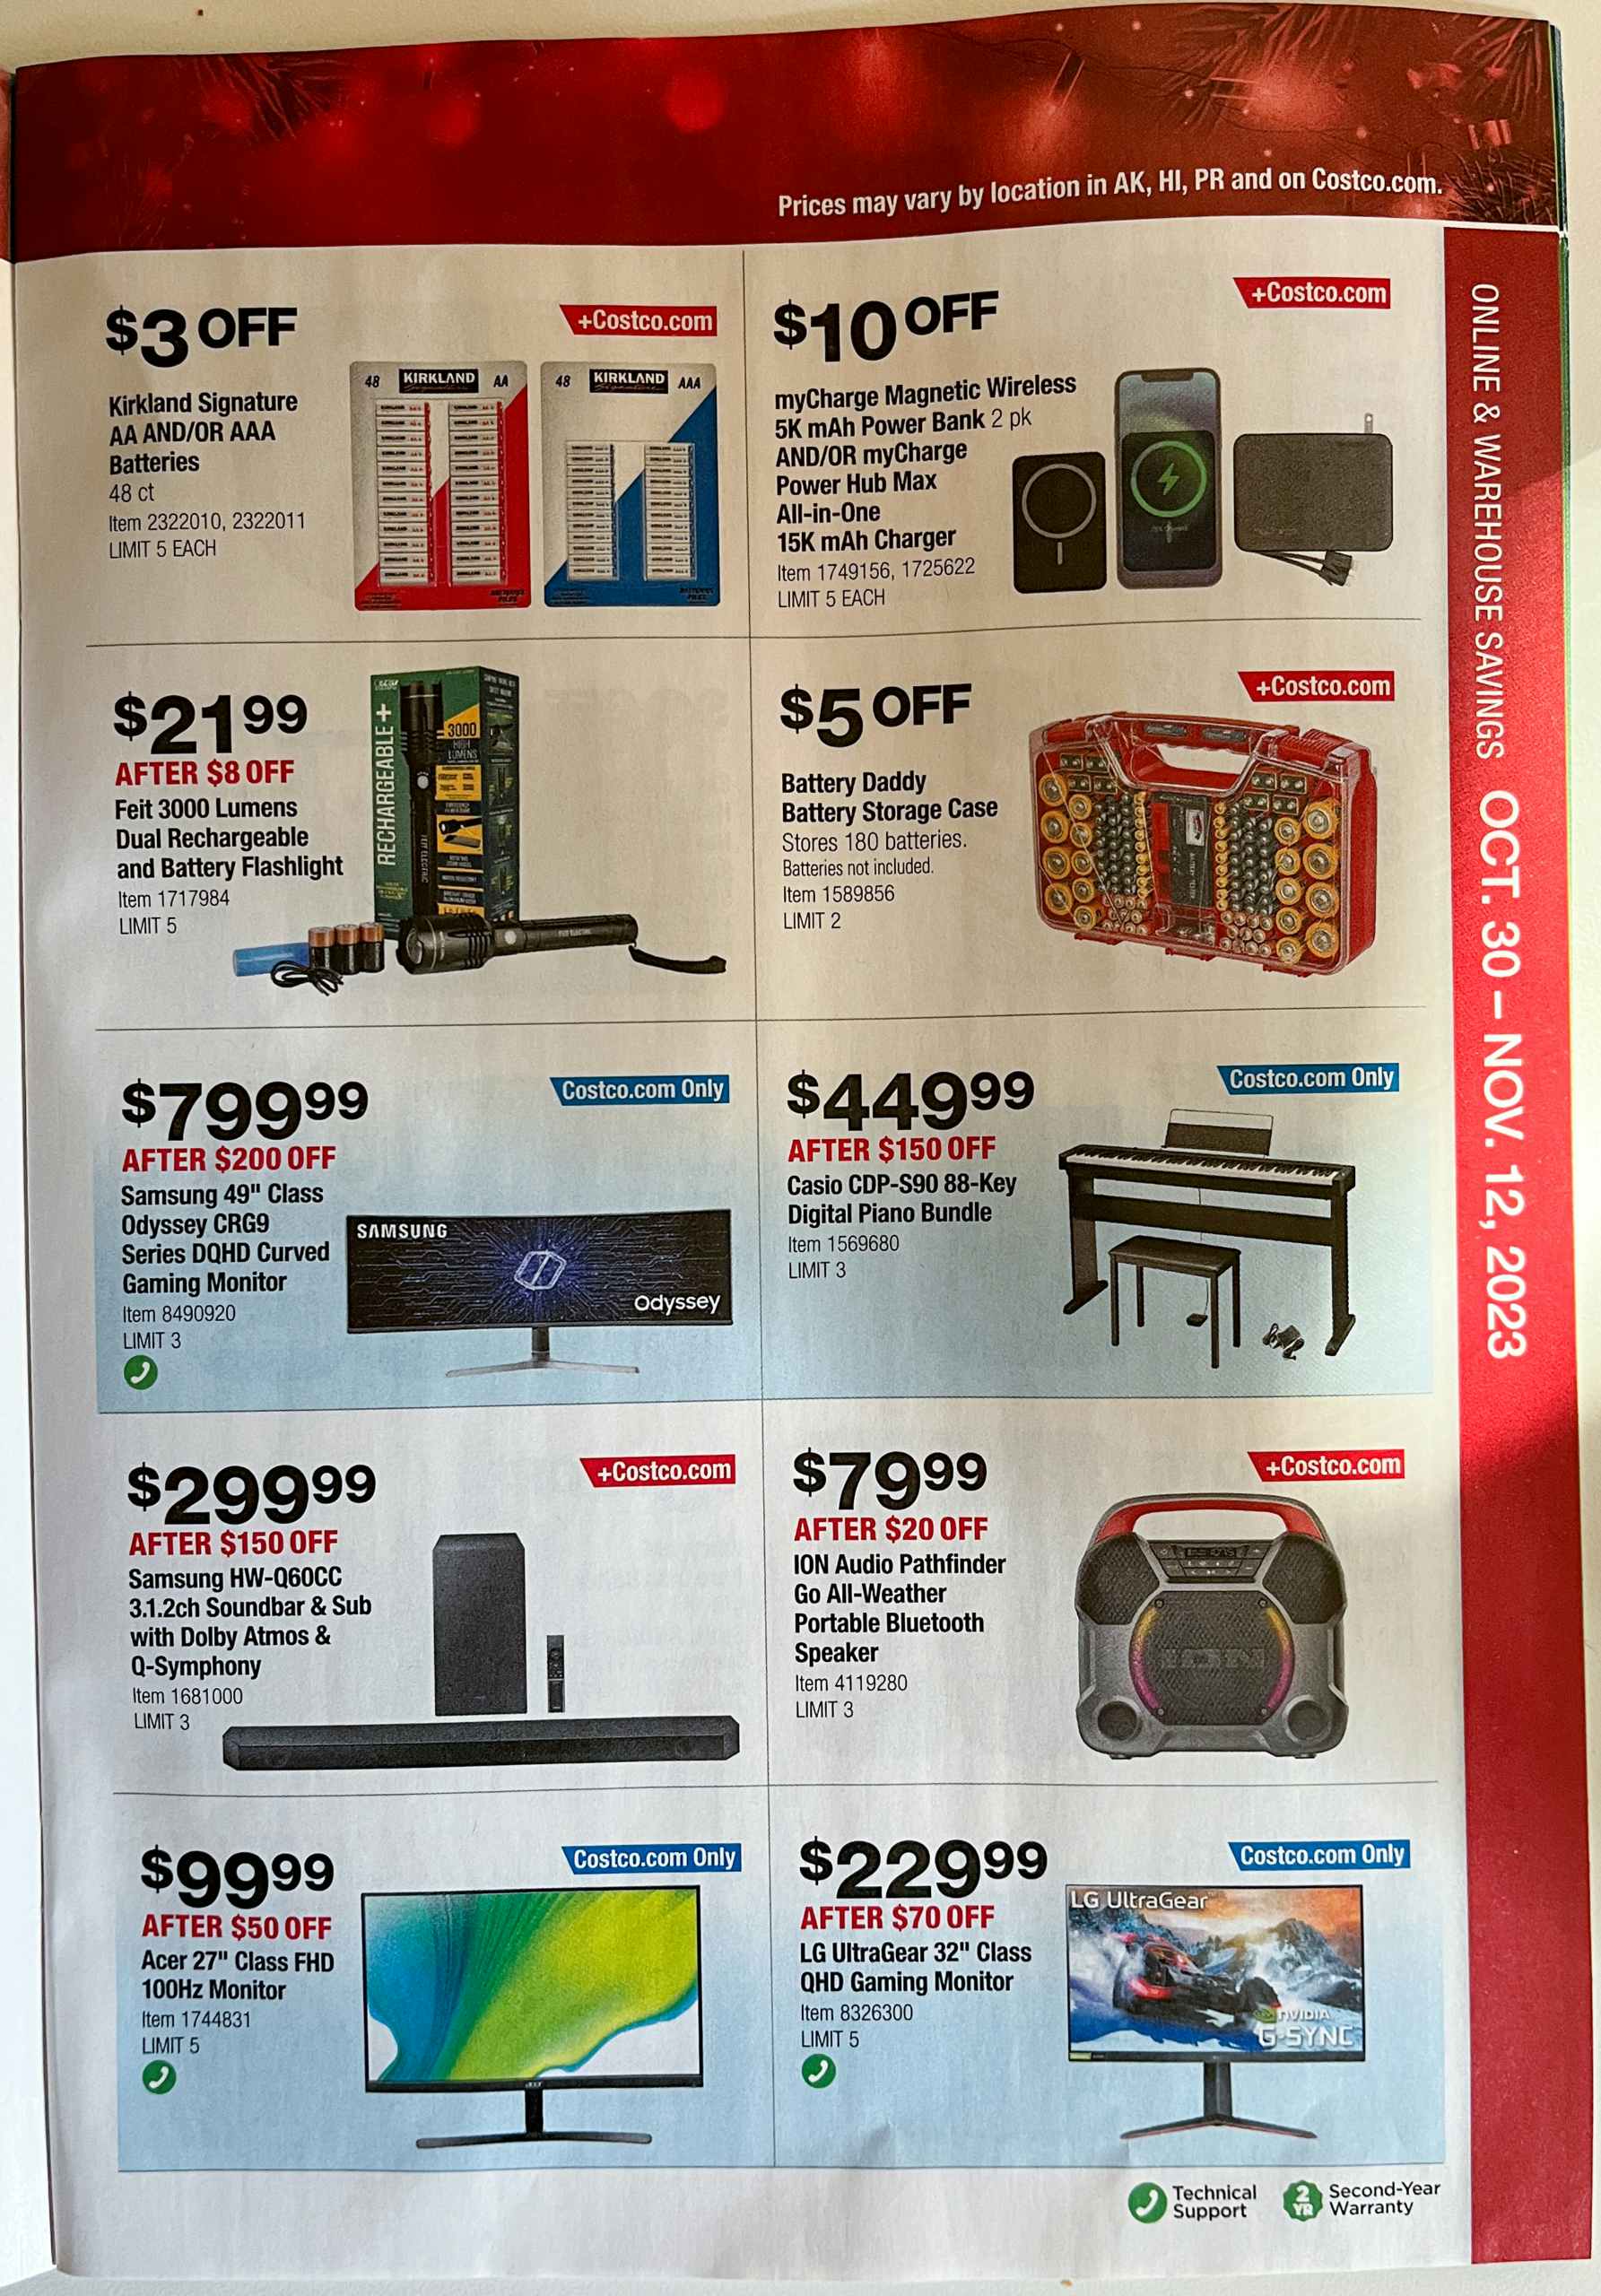 5 Super Clearance Deals Online at Costco Now